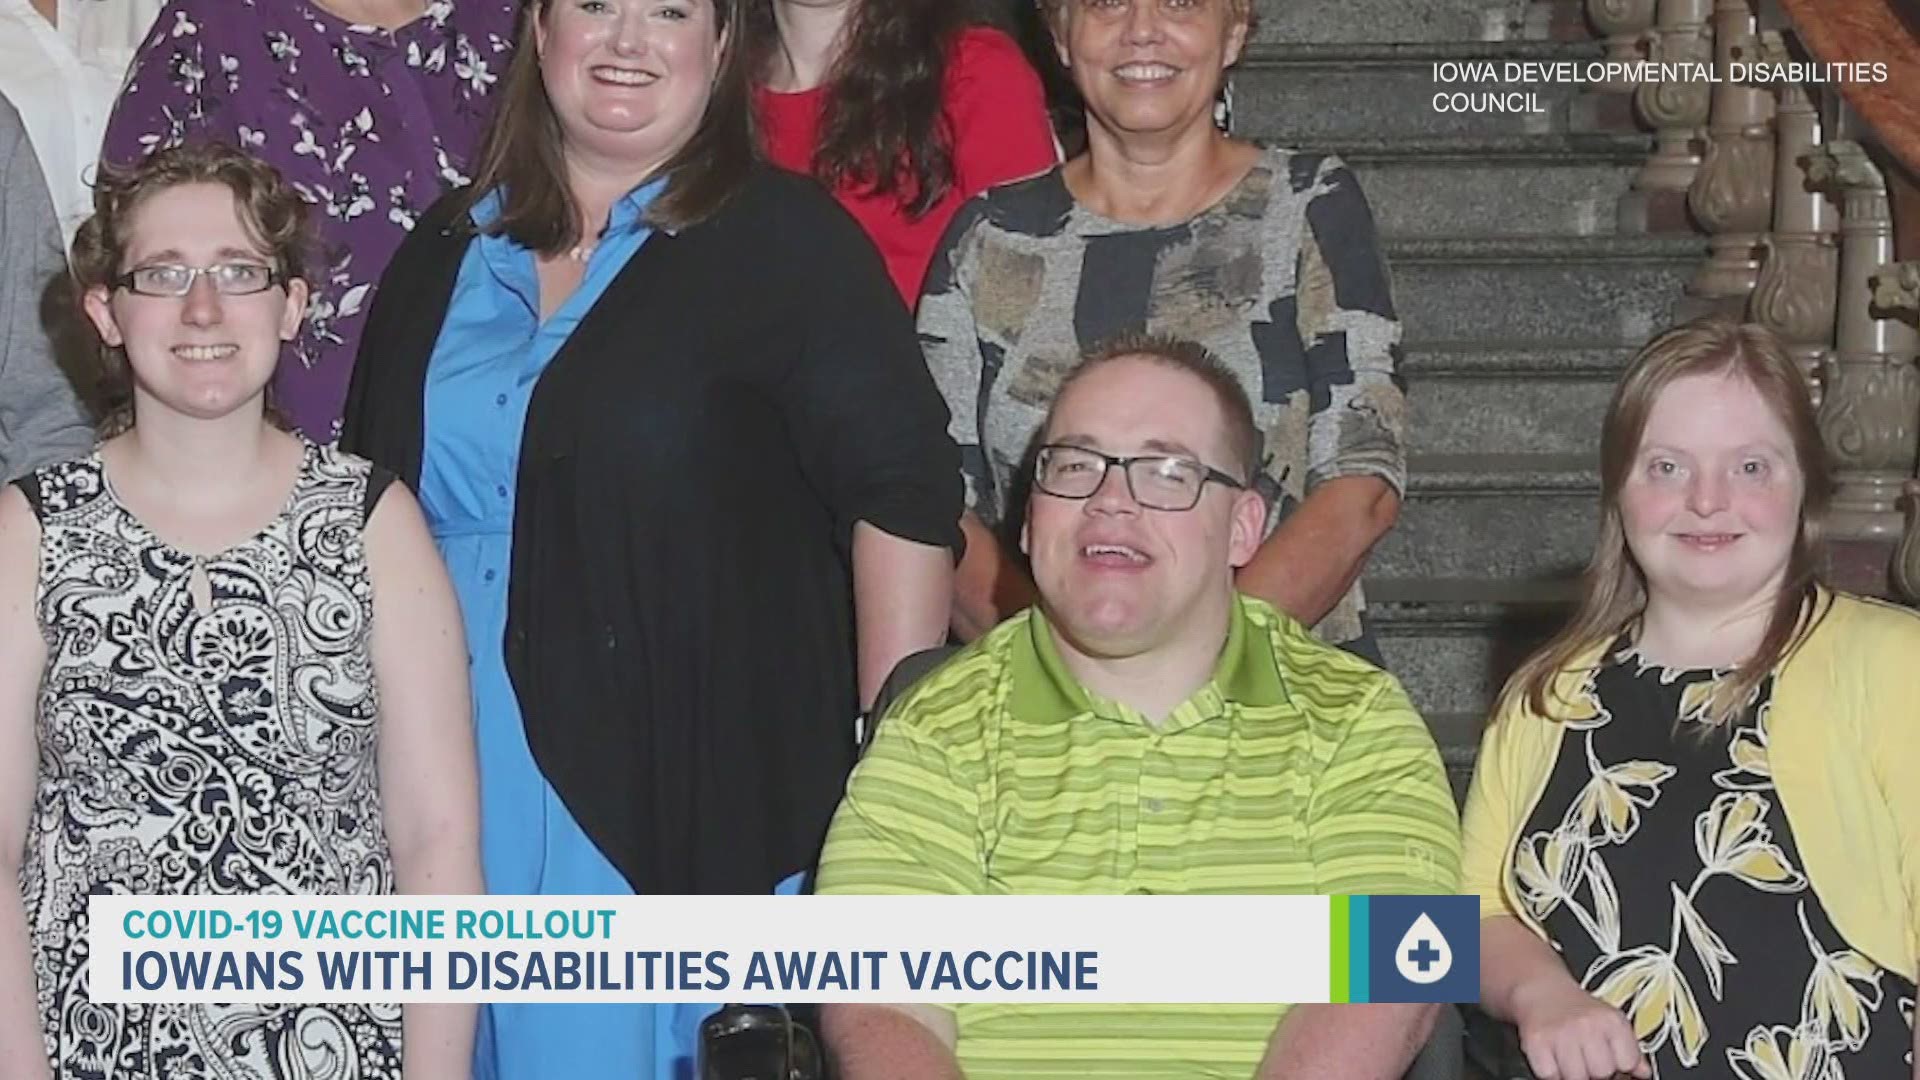 Isolation is often felt more strongly by individuals with disabilities, and families hope the vaccine will alleviate that by allowing community gatherings once more.